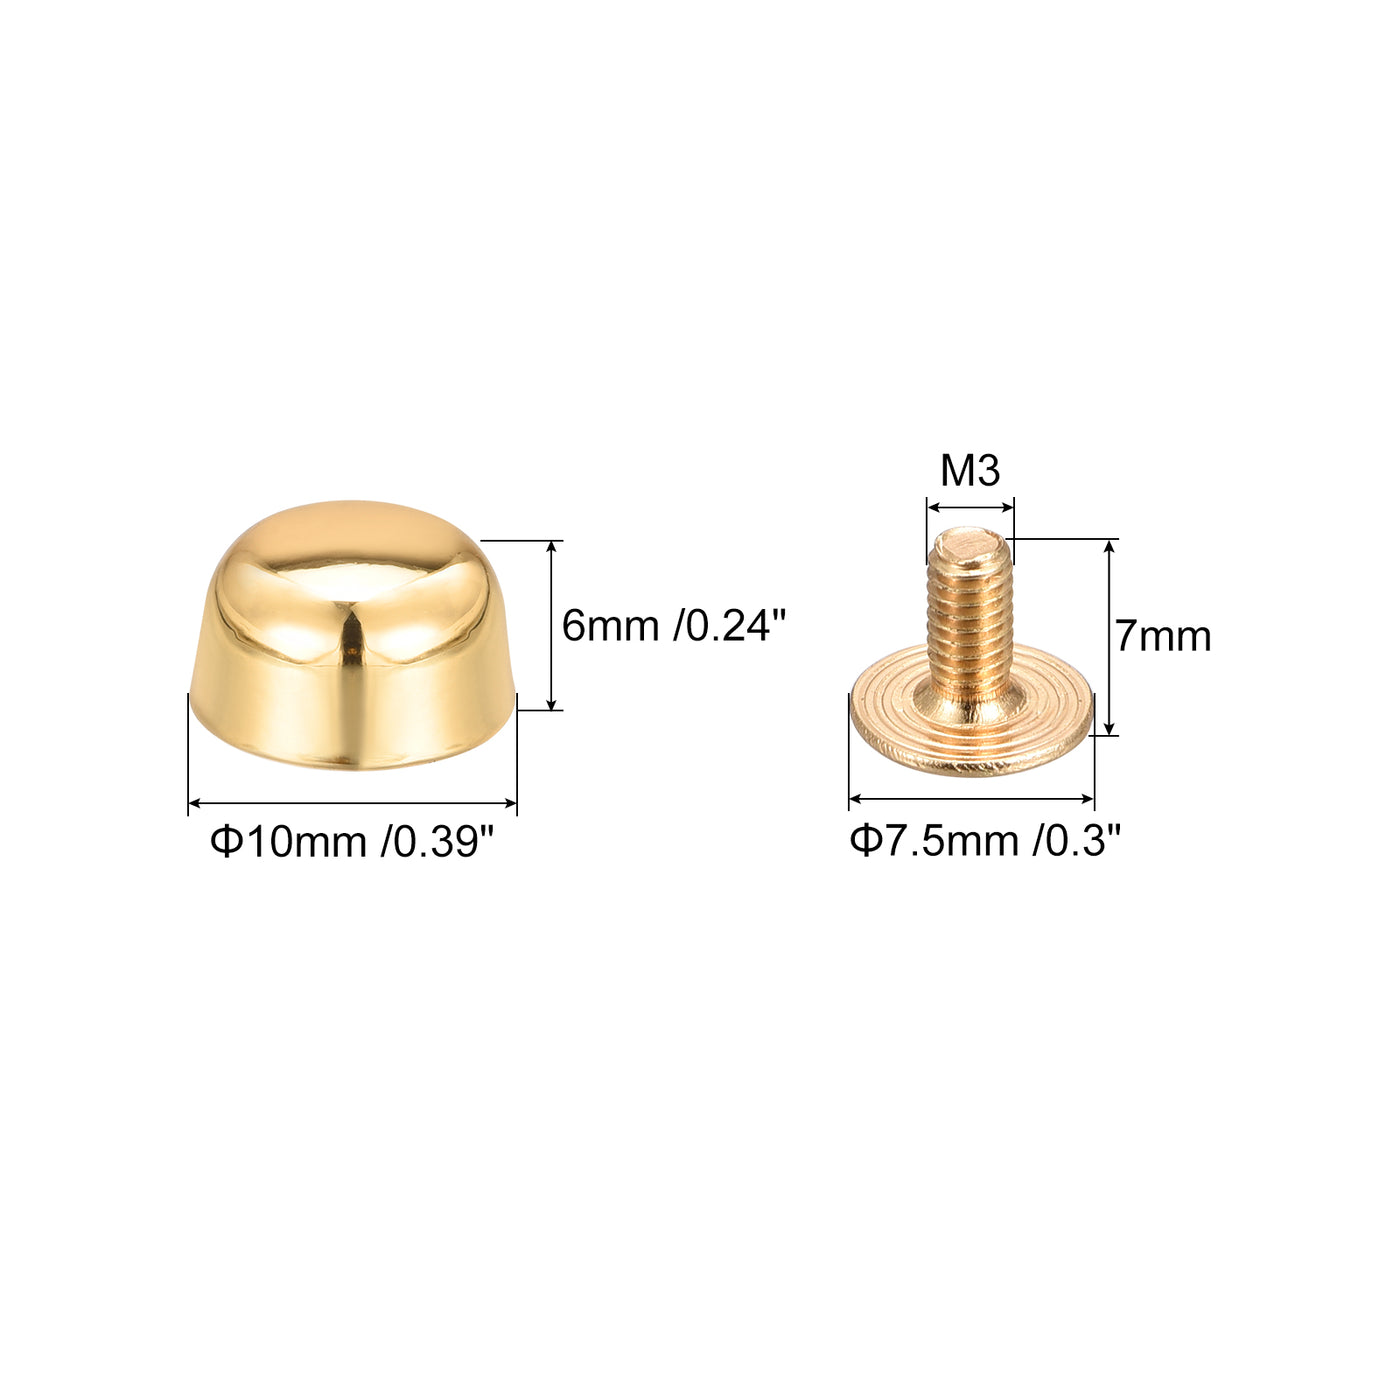 Uxcell Uxcell 10x6mm Screw Back Rivets Hollow Curved Head Leather Studs Bronze Tone 8 Sets